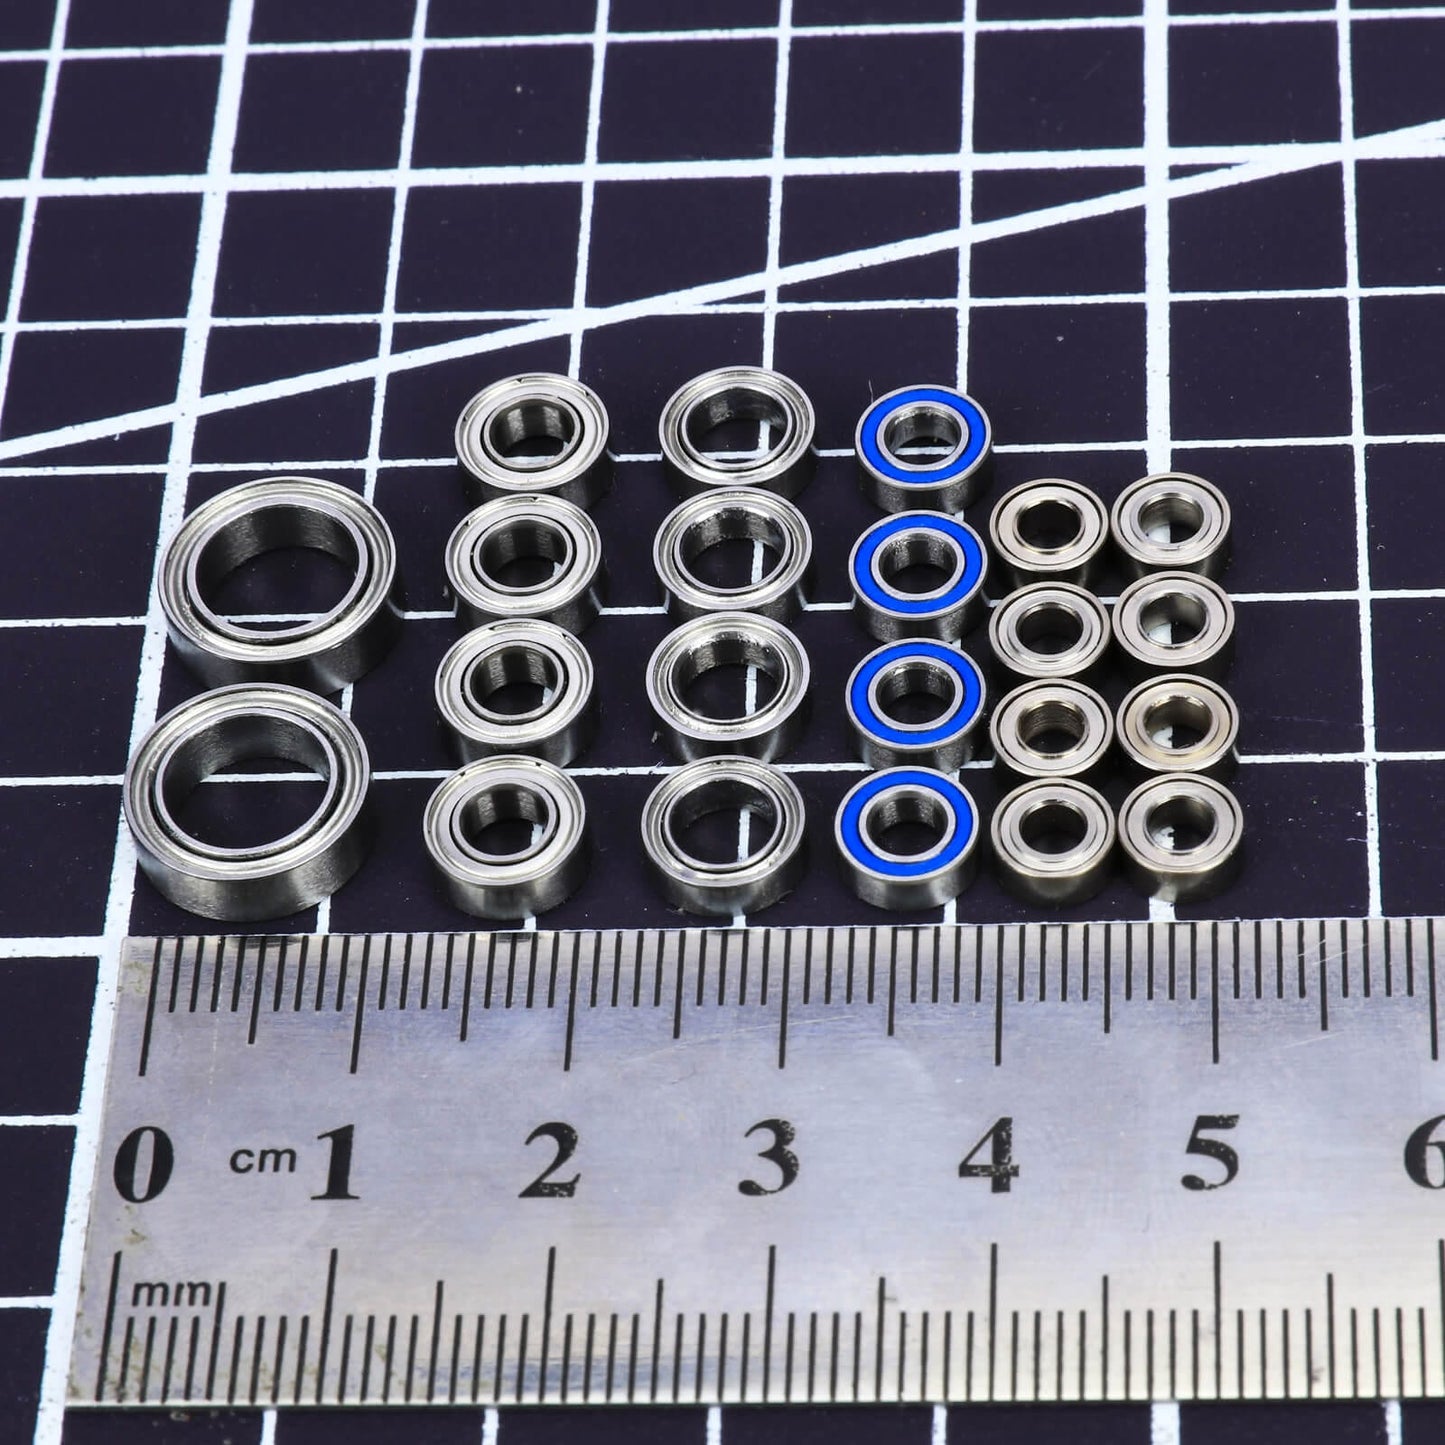 RCAWD Full Bearings Set for Trx4m Upgrades - RCAWD